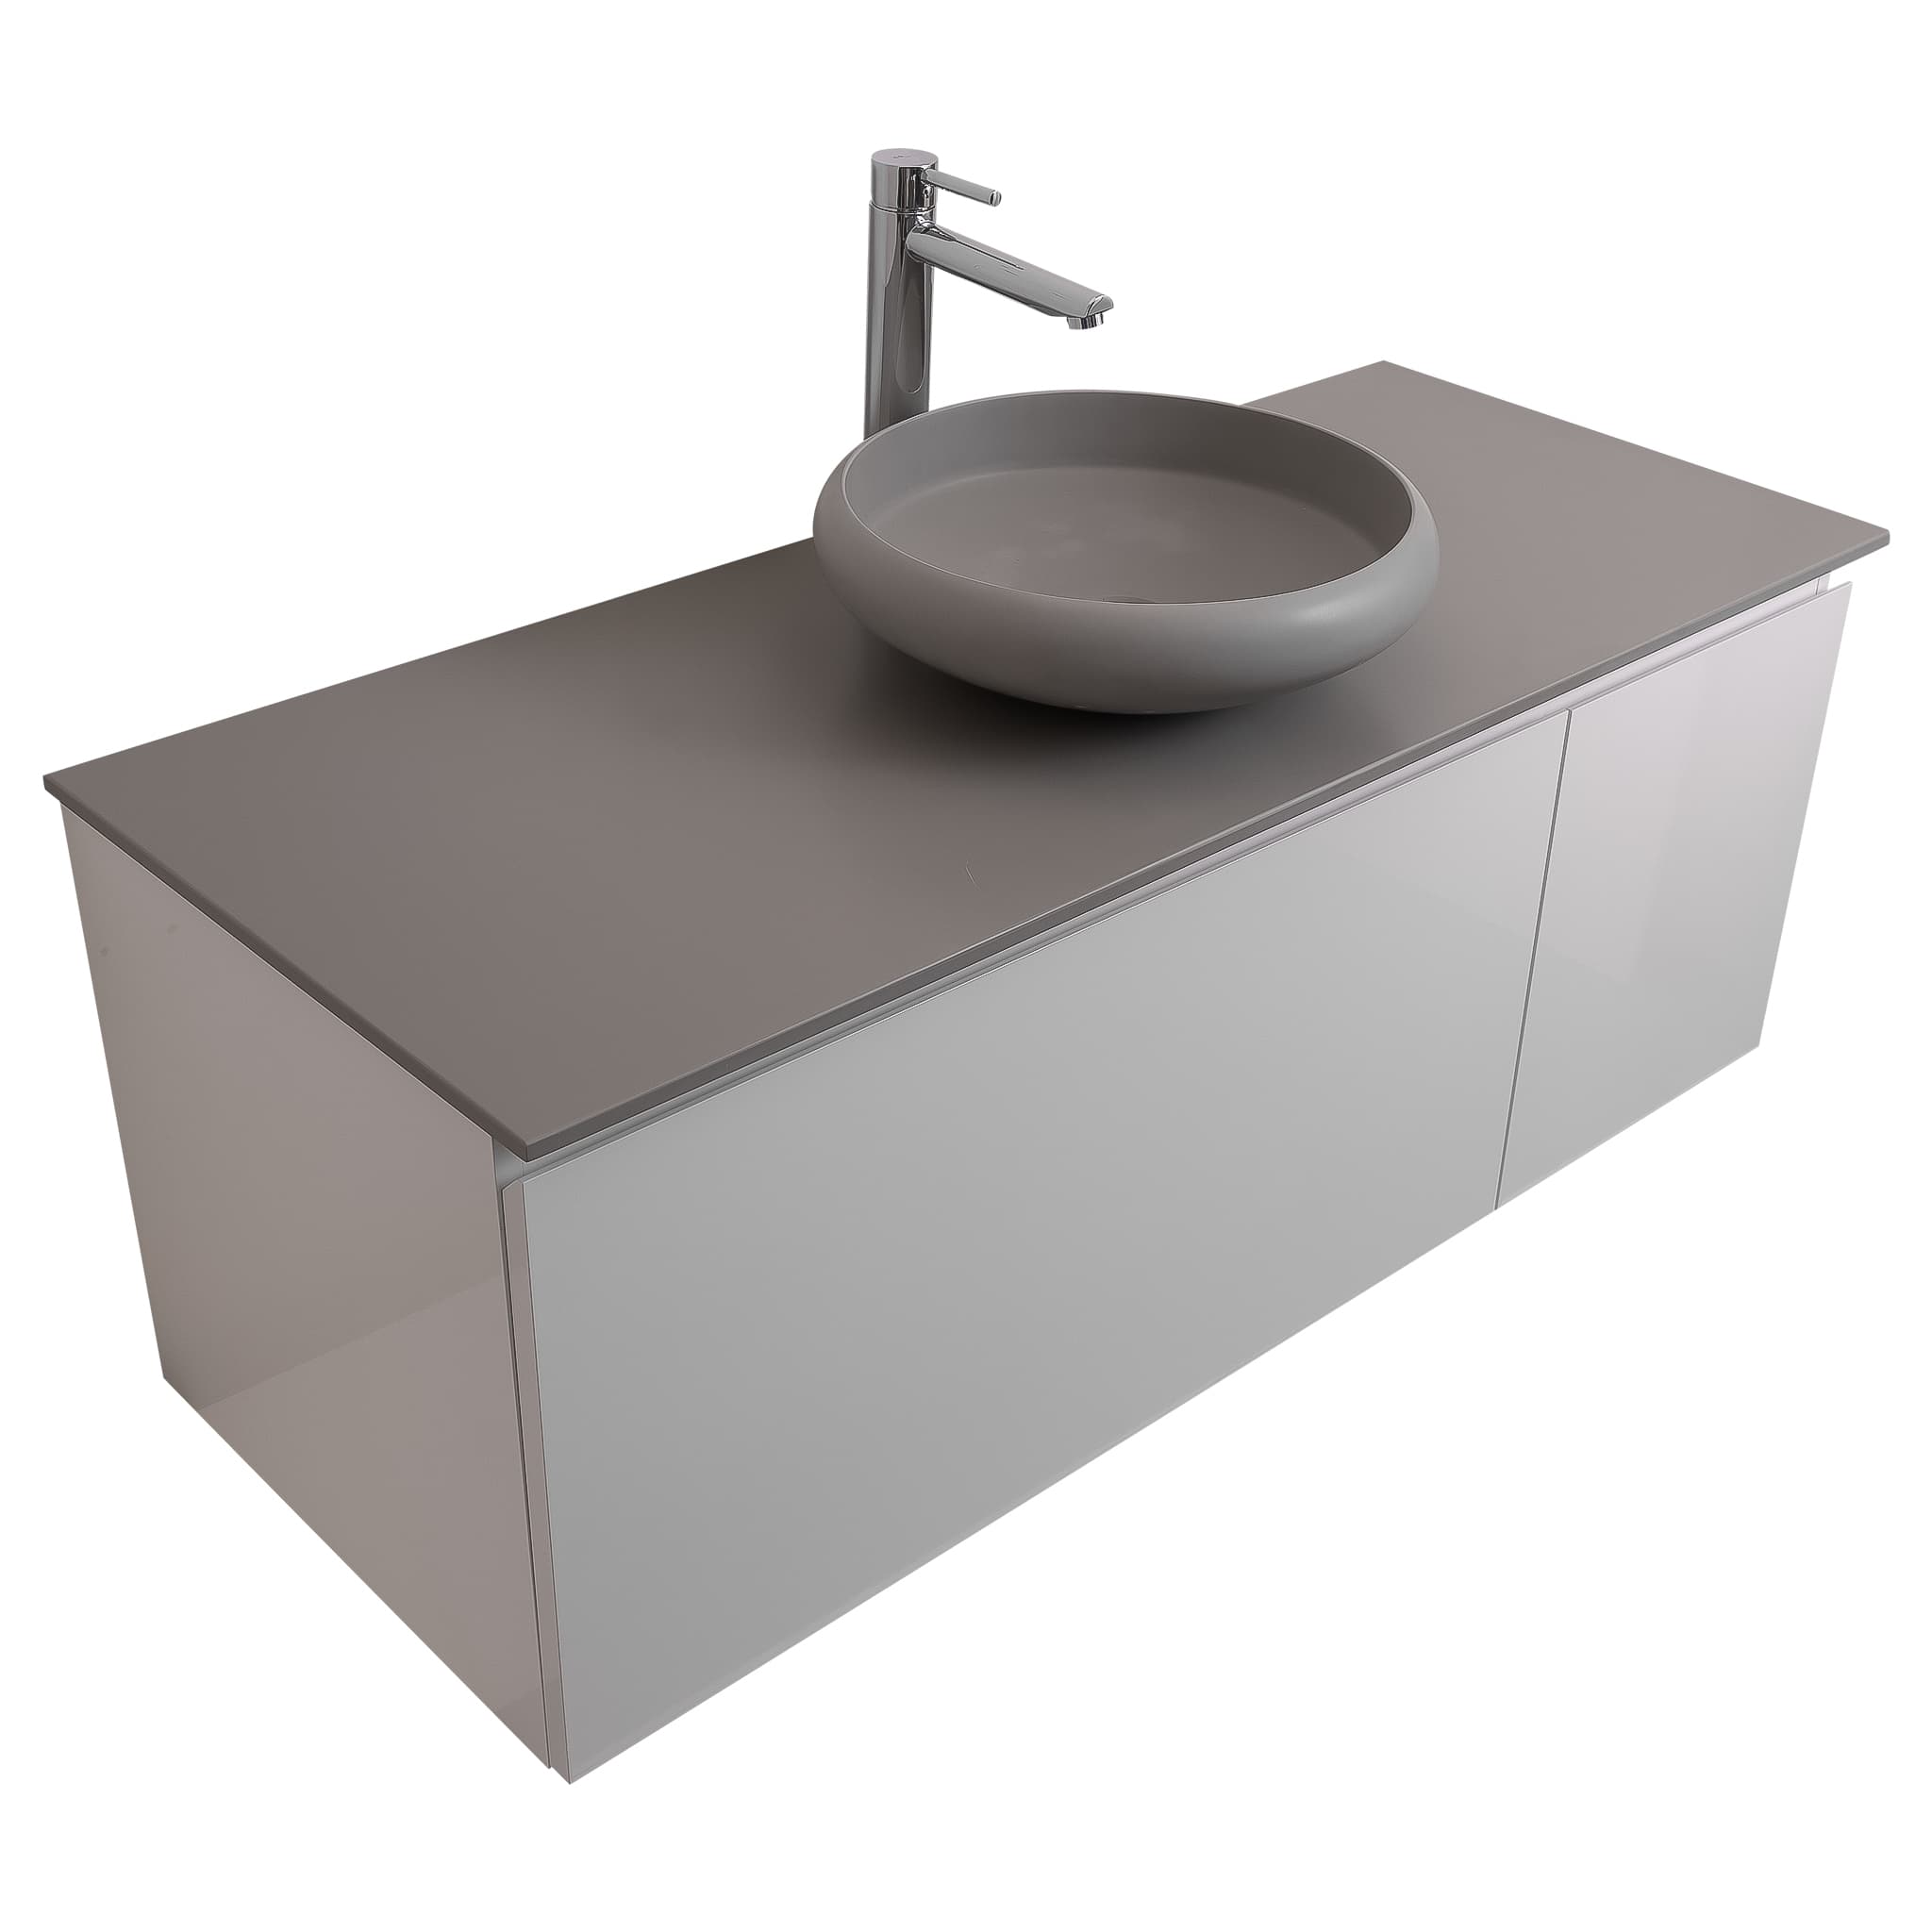 Venice 47.5 White High Gloss Cabinet, Solid Surface Flat Grey Counter And Round Solid Surface Grey Basin 1153, Wall Mounted Modern Vanity Set